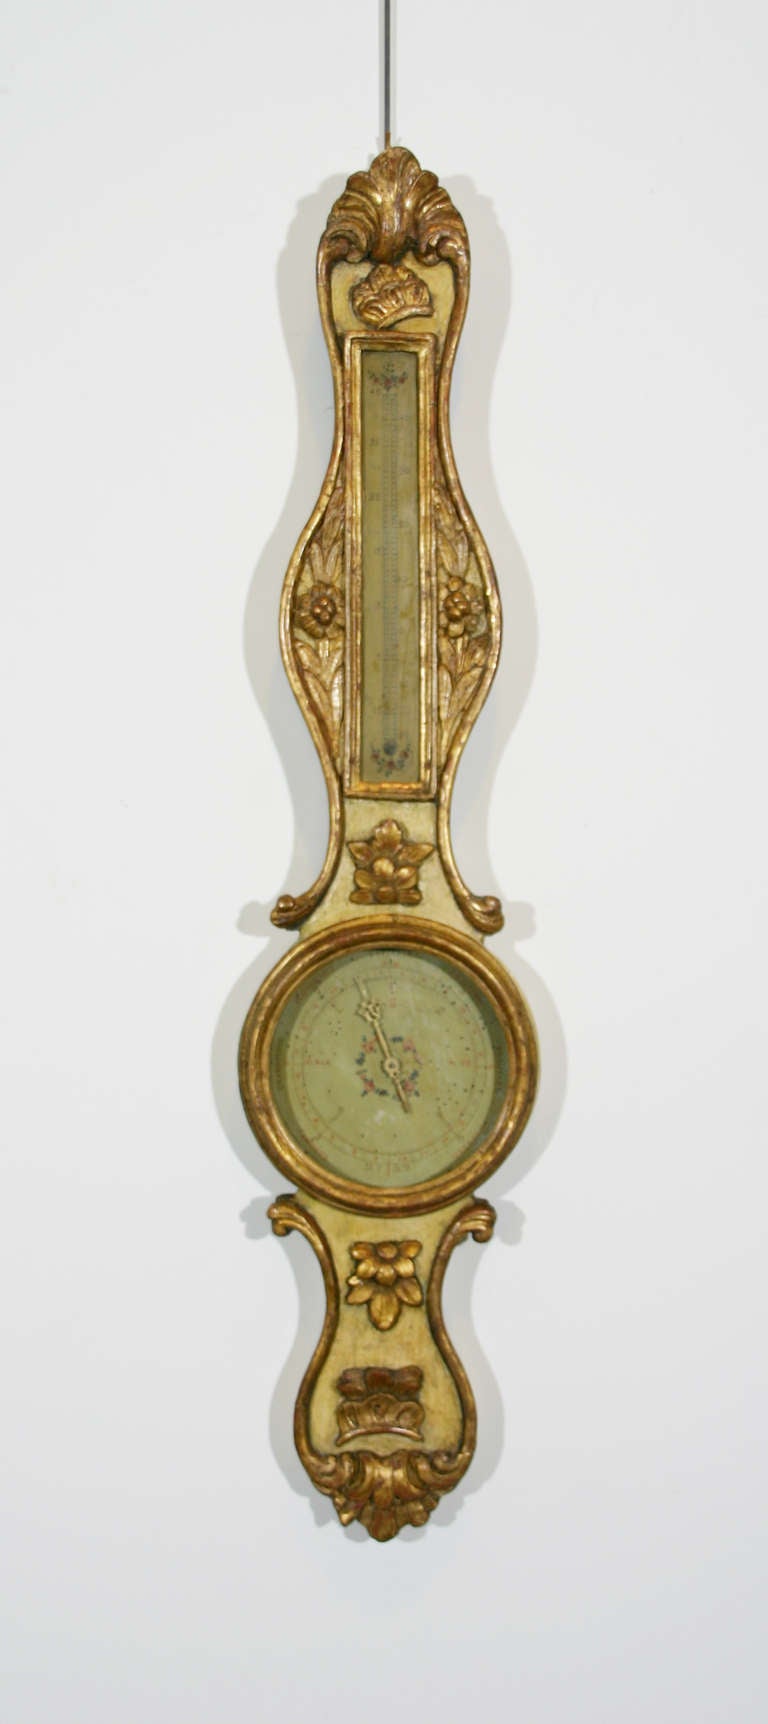 A French mid-18th century painted and parcel-gilt barometer with delicate floral carving.